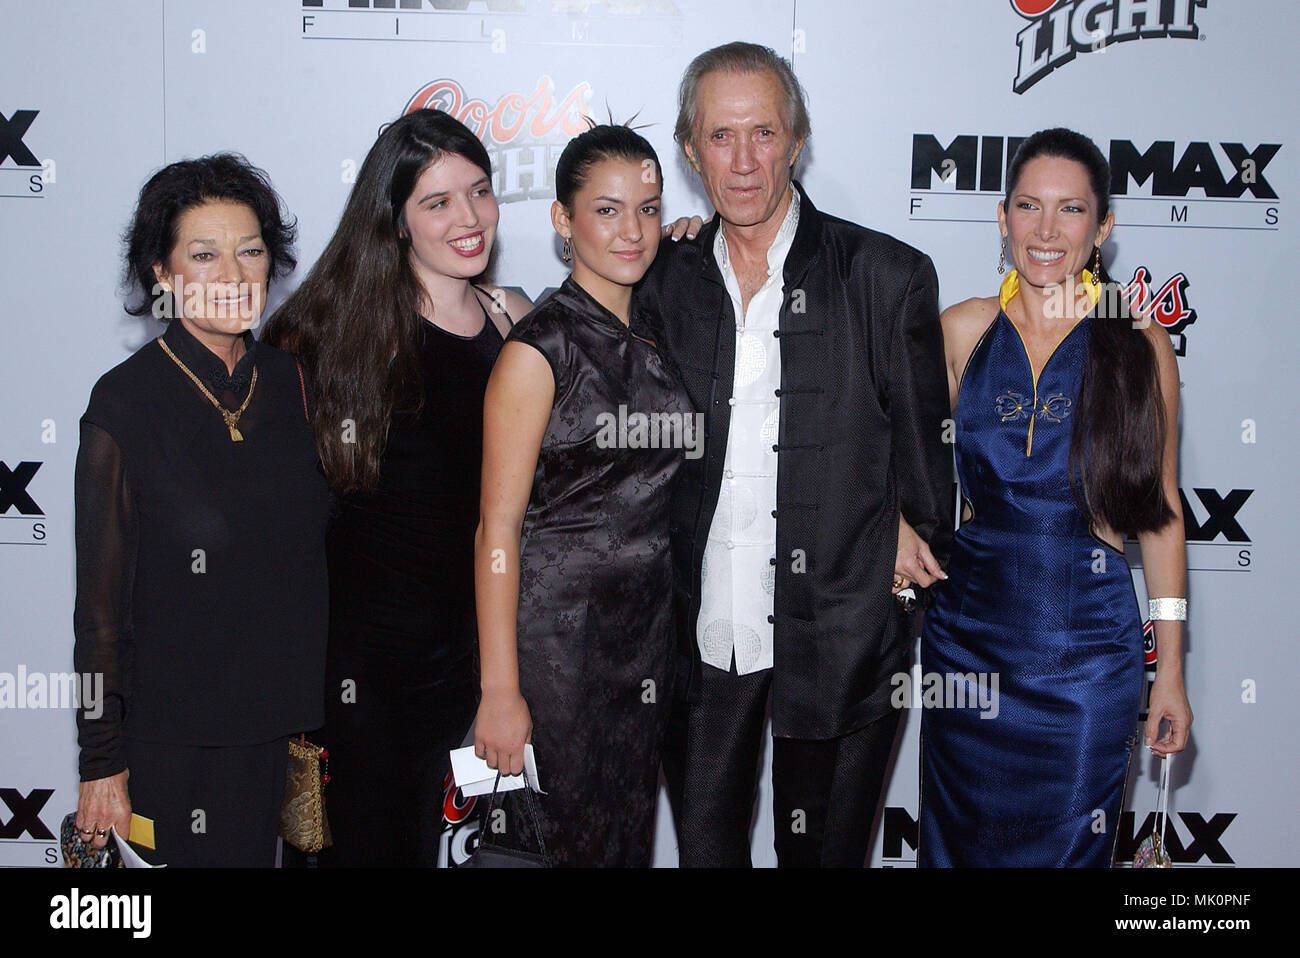 David Carradine posing with wife and kids  at the  'KILL BILL VOL.1 PREMIERE' at the Chinese Theatre in Los Angeles. September 29, 2003.           -            CarradineDavid wife kids07.JPG           -              CarradineDavid wife kids07.JPGCarradineDavid wife kids07  Event in Hollywood Life - California,  Red Carpet Event, Vertical, USA, Film Industry, Celebrities,  Photography, Bestof, Arts Culture and Entertainment, Topix Celebrities fashion /  from the Red Carpet-, Vertical, Best of, Hollywood Life, Event in Hollywood Life - California,  Red Carpet , USA, Film Industry, Celebrities,   Stock Photo